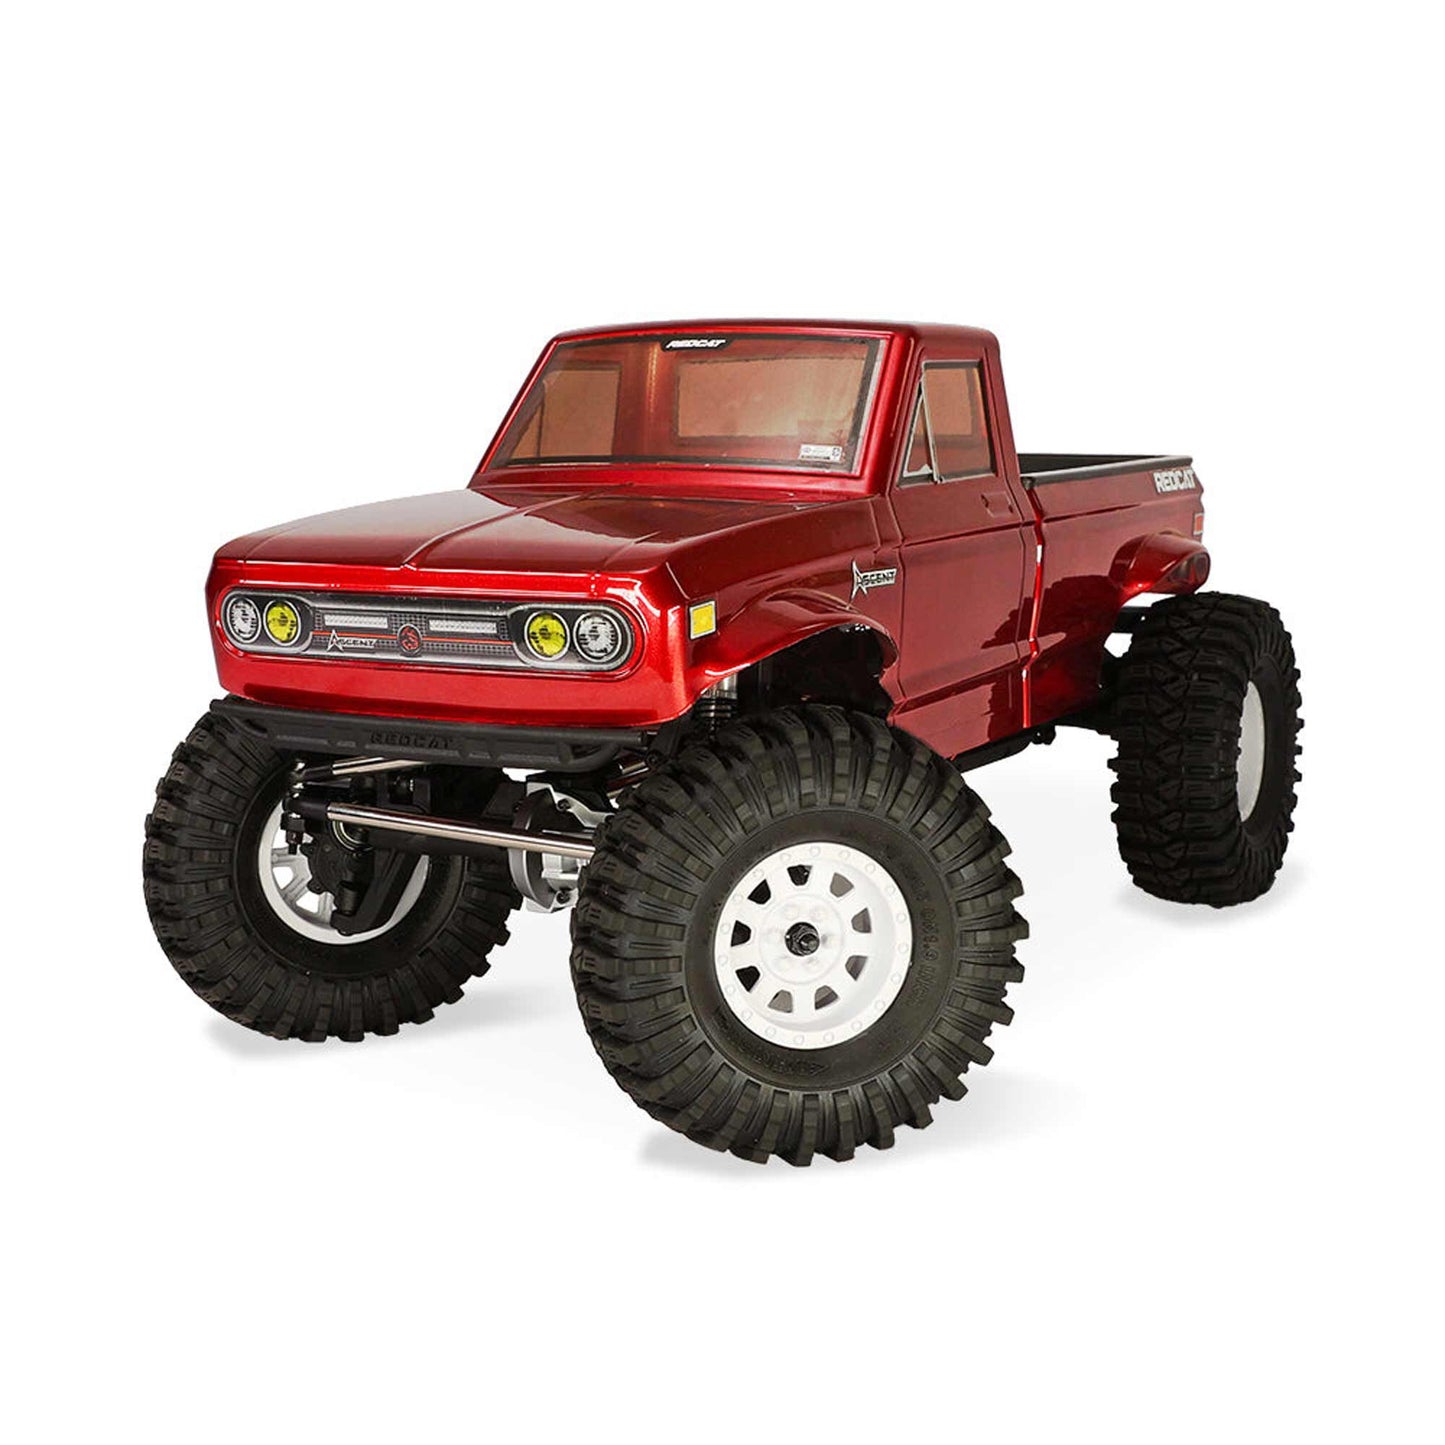 1/10 Redcat Ascent - LCG Rock Crawler - RED 1 Piece Body